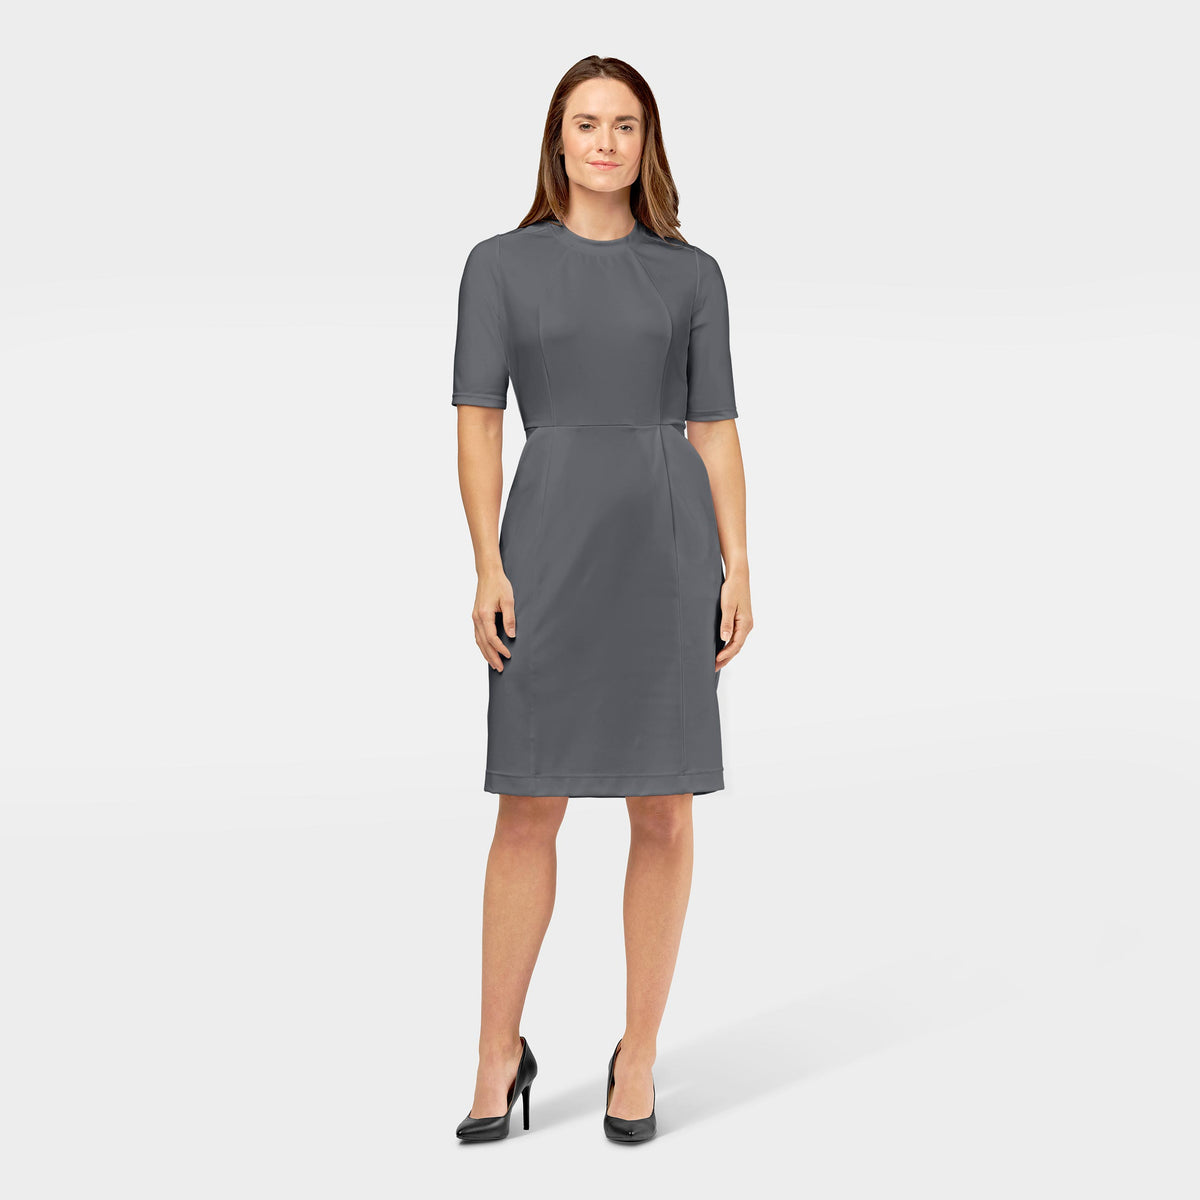 Slate The Performance Dress - Pewter